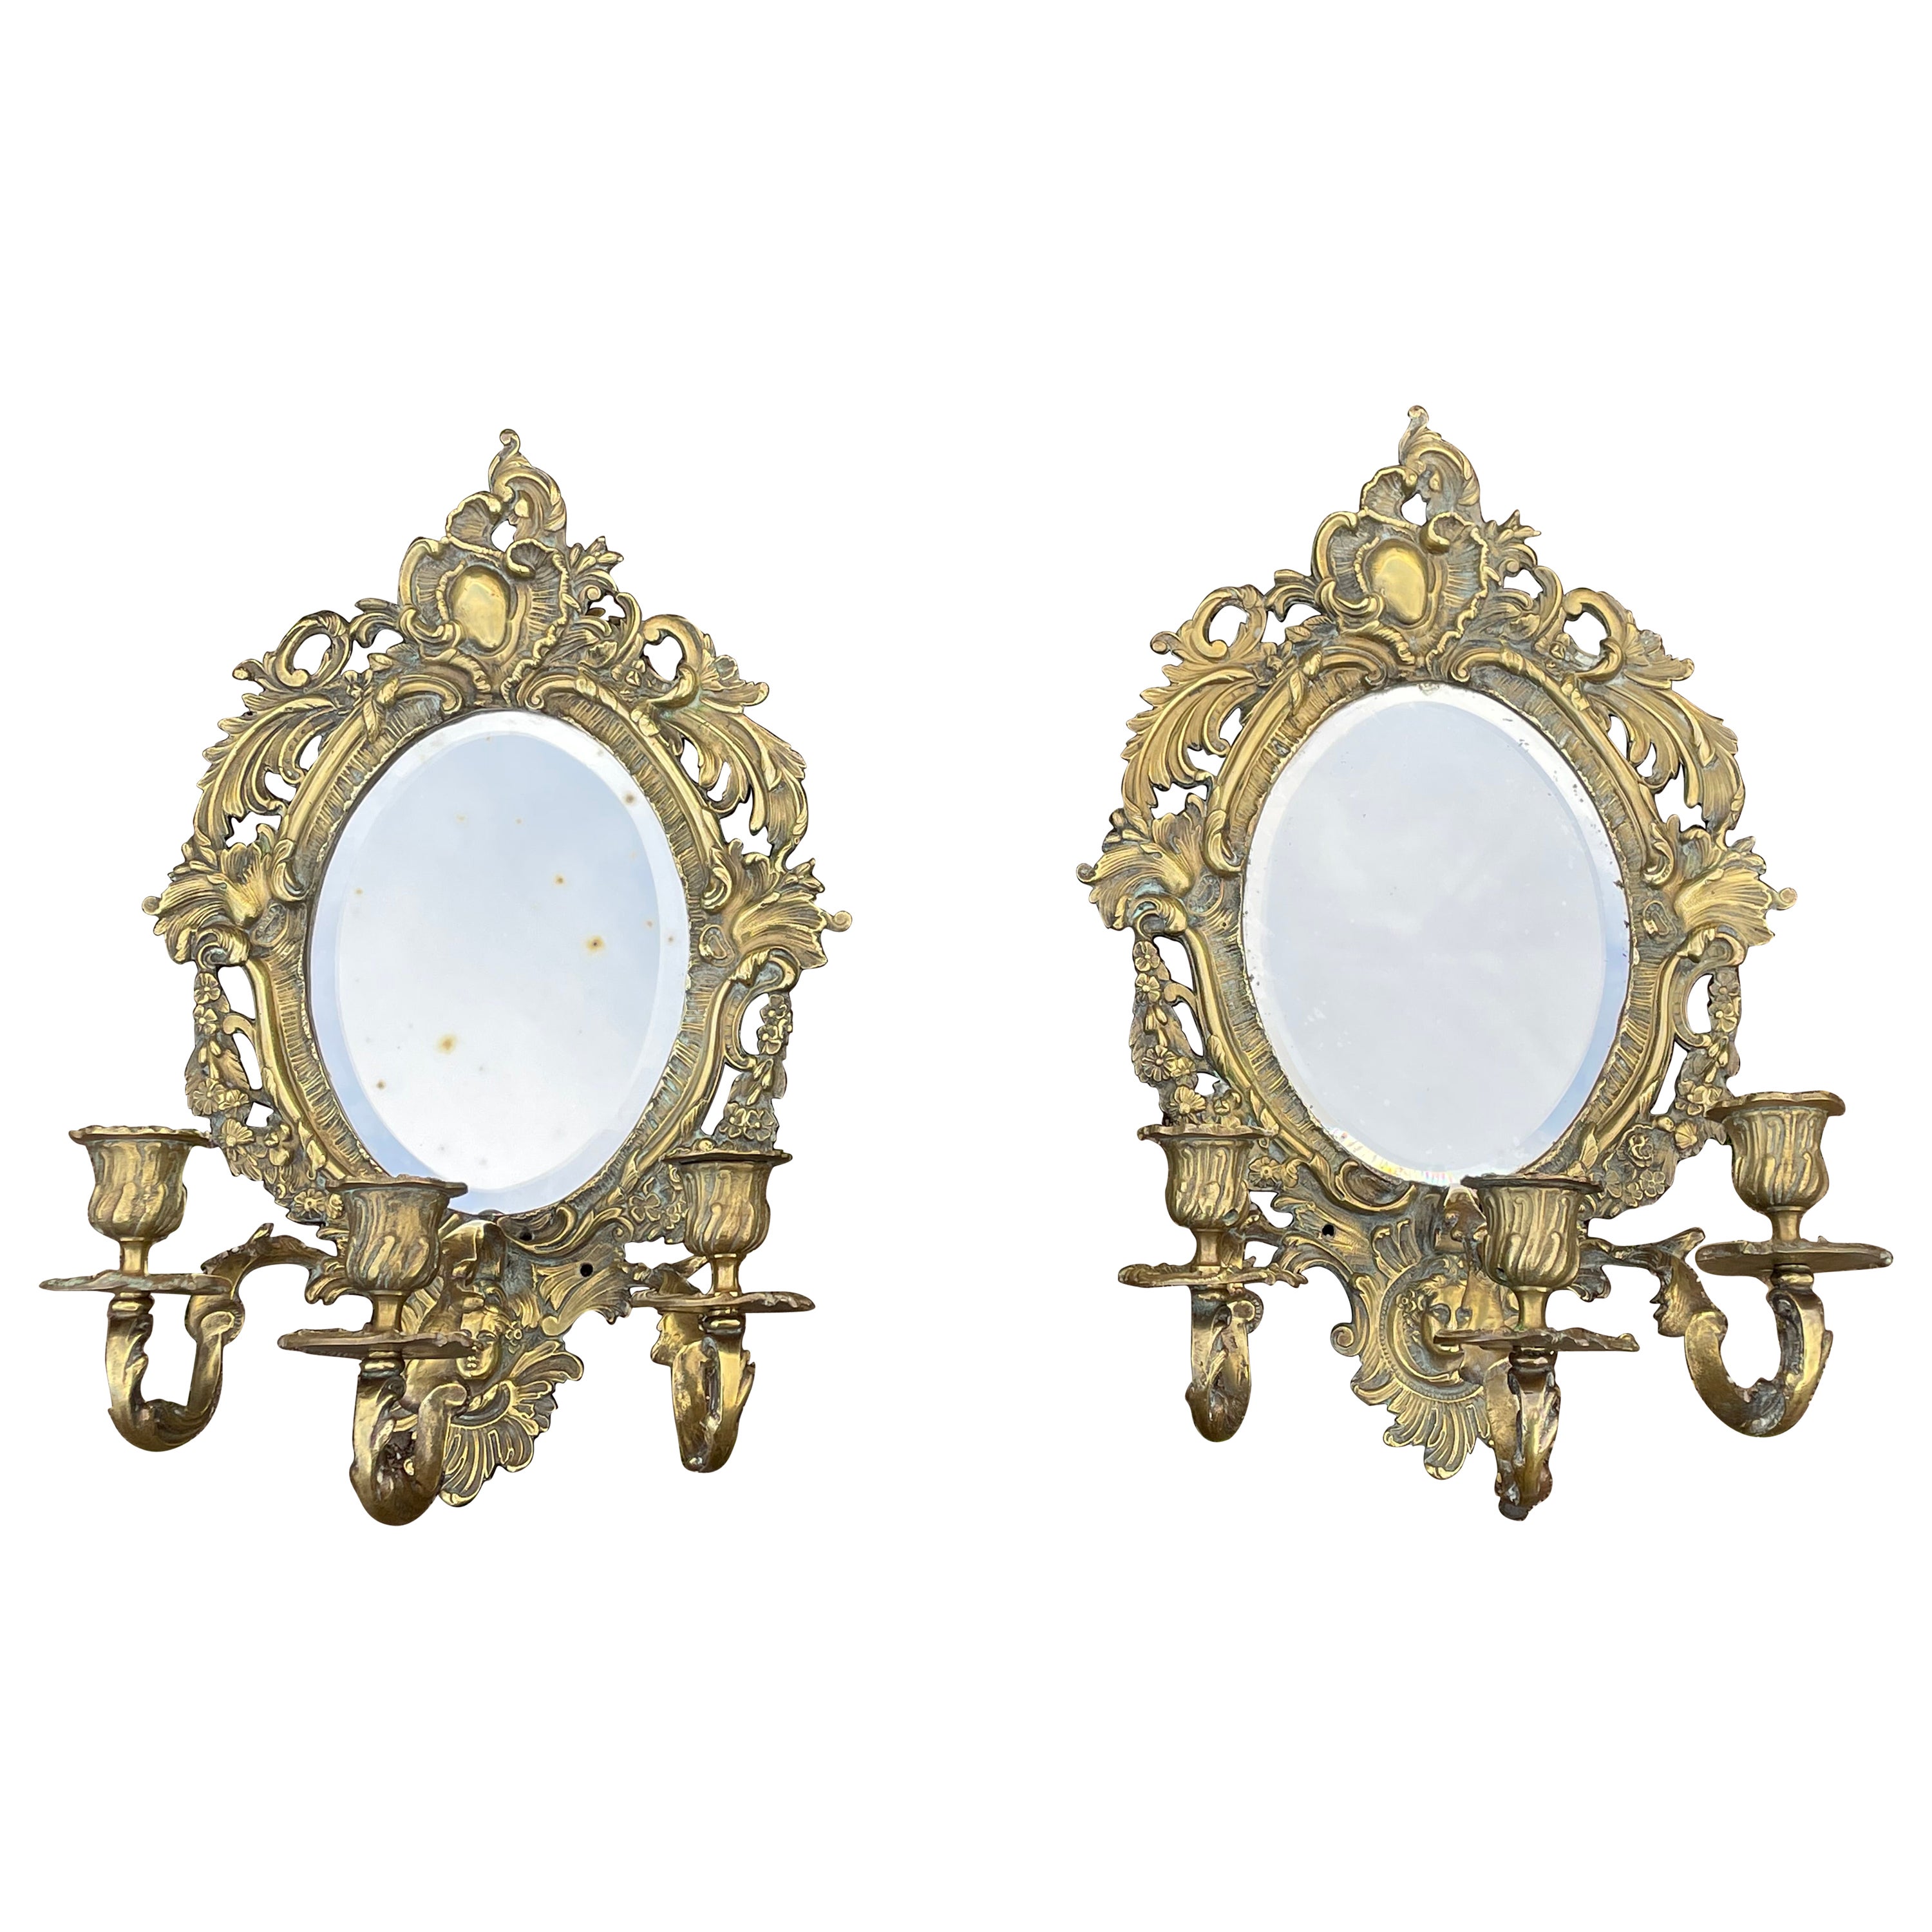 Antique Pair of Bronze Wall Sconce Candelabras w. Beveled Mirrors & Goddess Mask For Sale